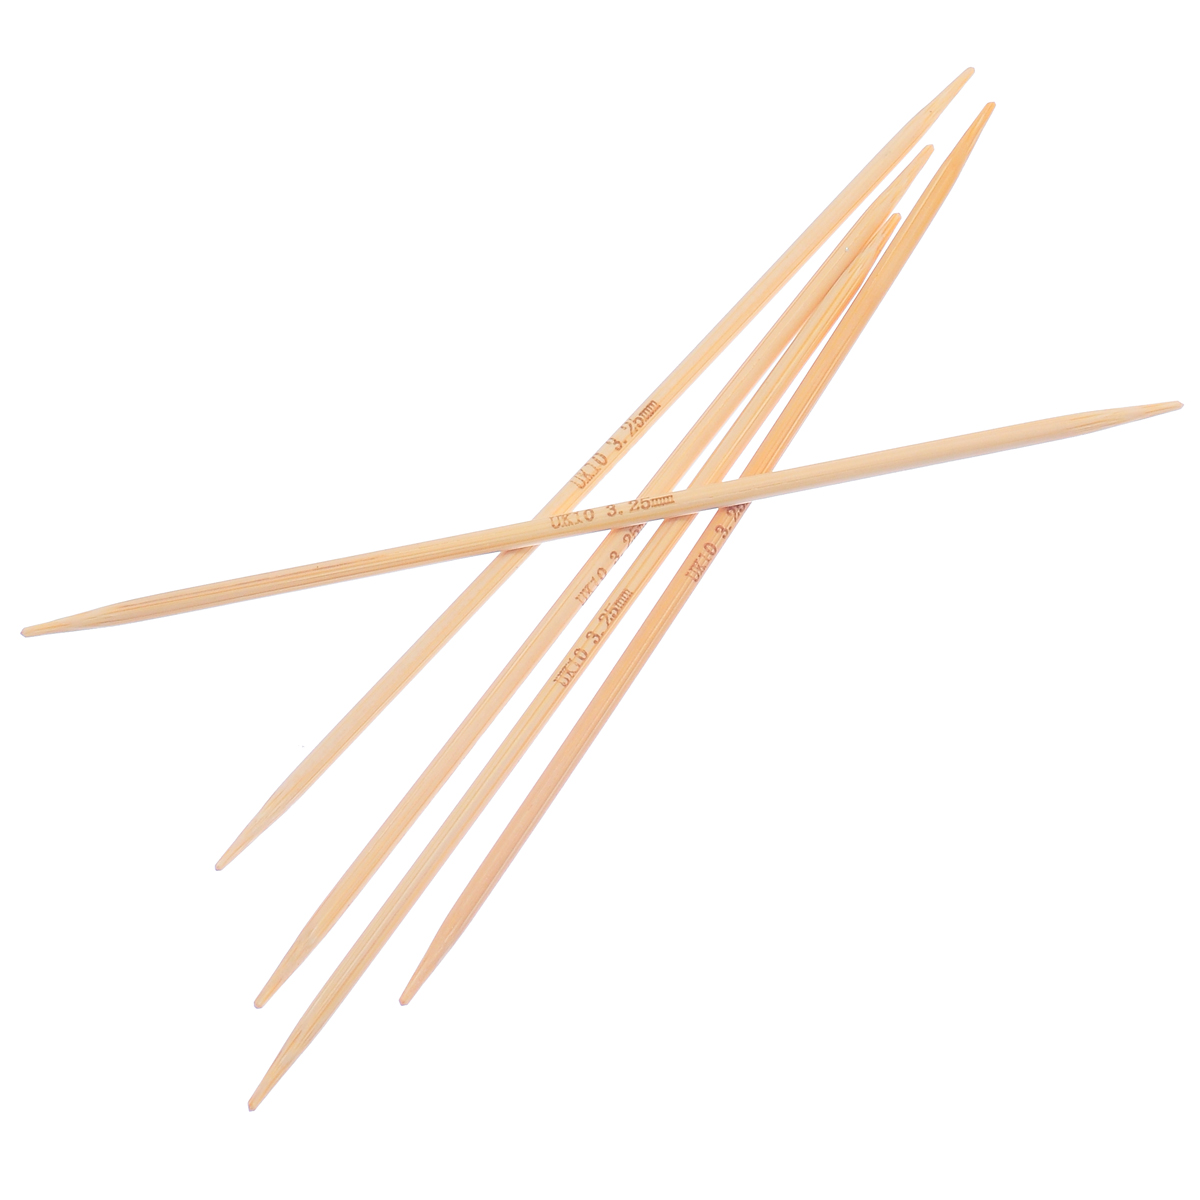 Picture of (UK10 3.25mm) Bamboo Double Pointed Knitting Needles Natural 15cm(5 7/8") long, 1 Set ( 5 PCs/Set)